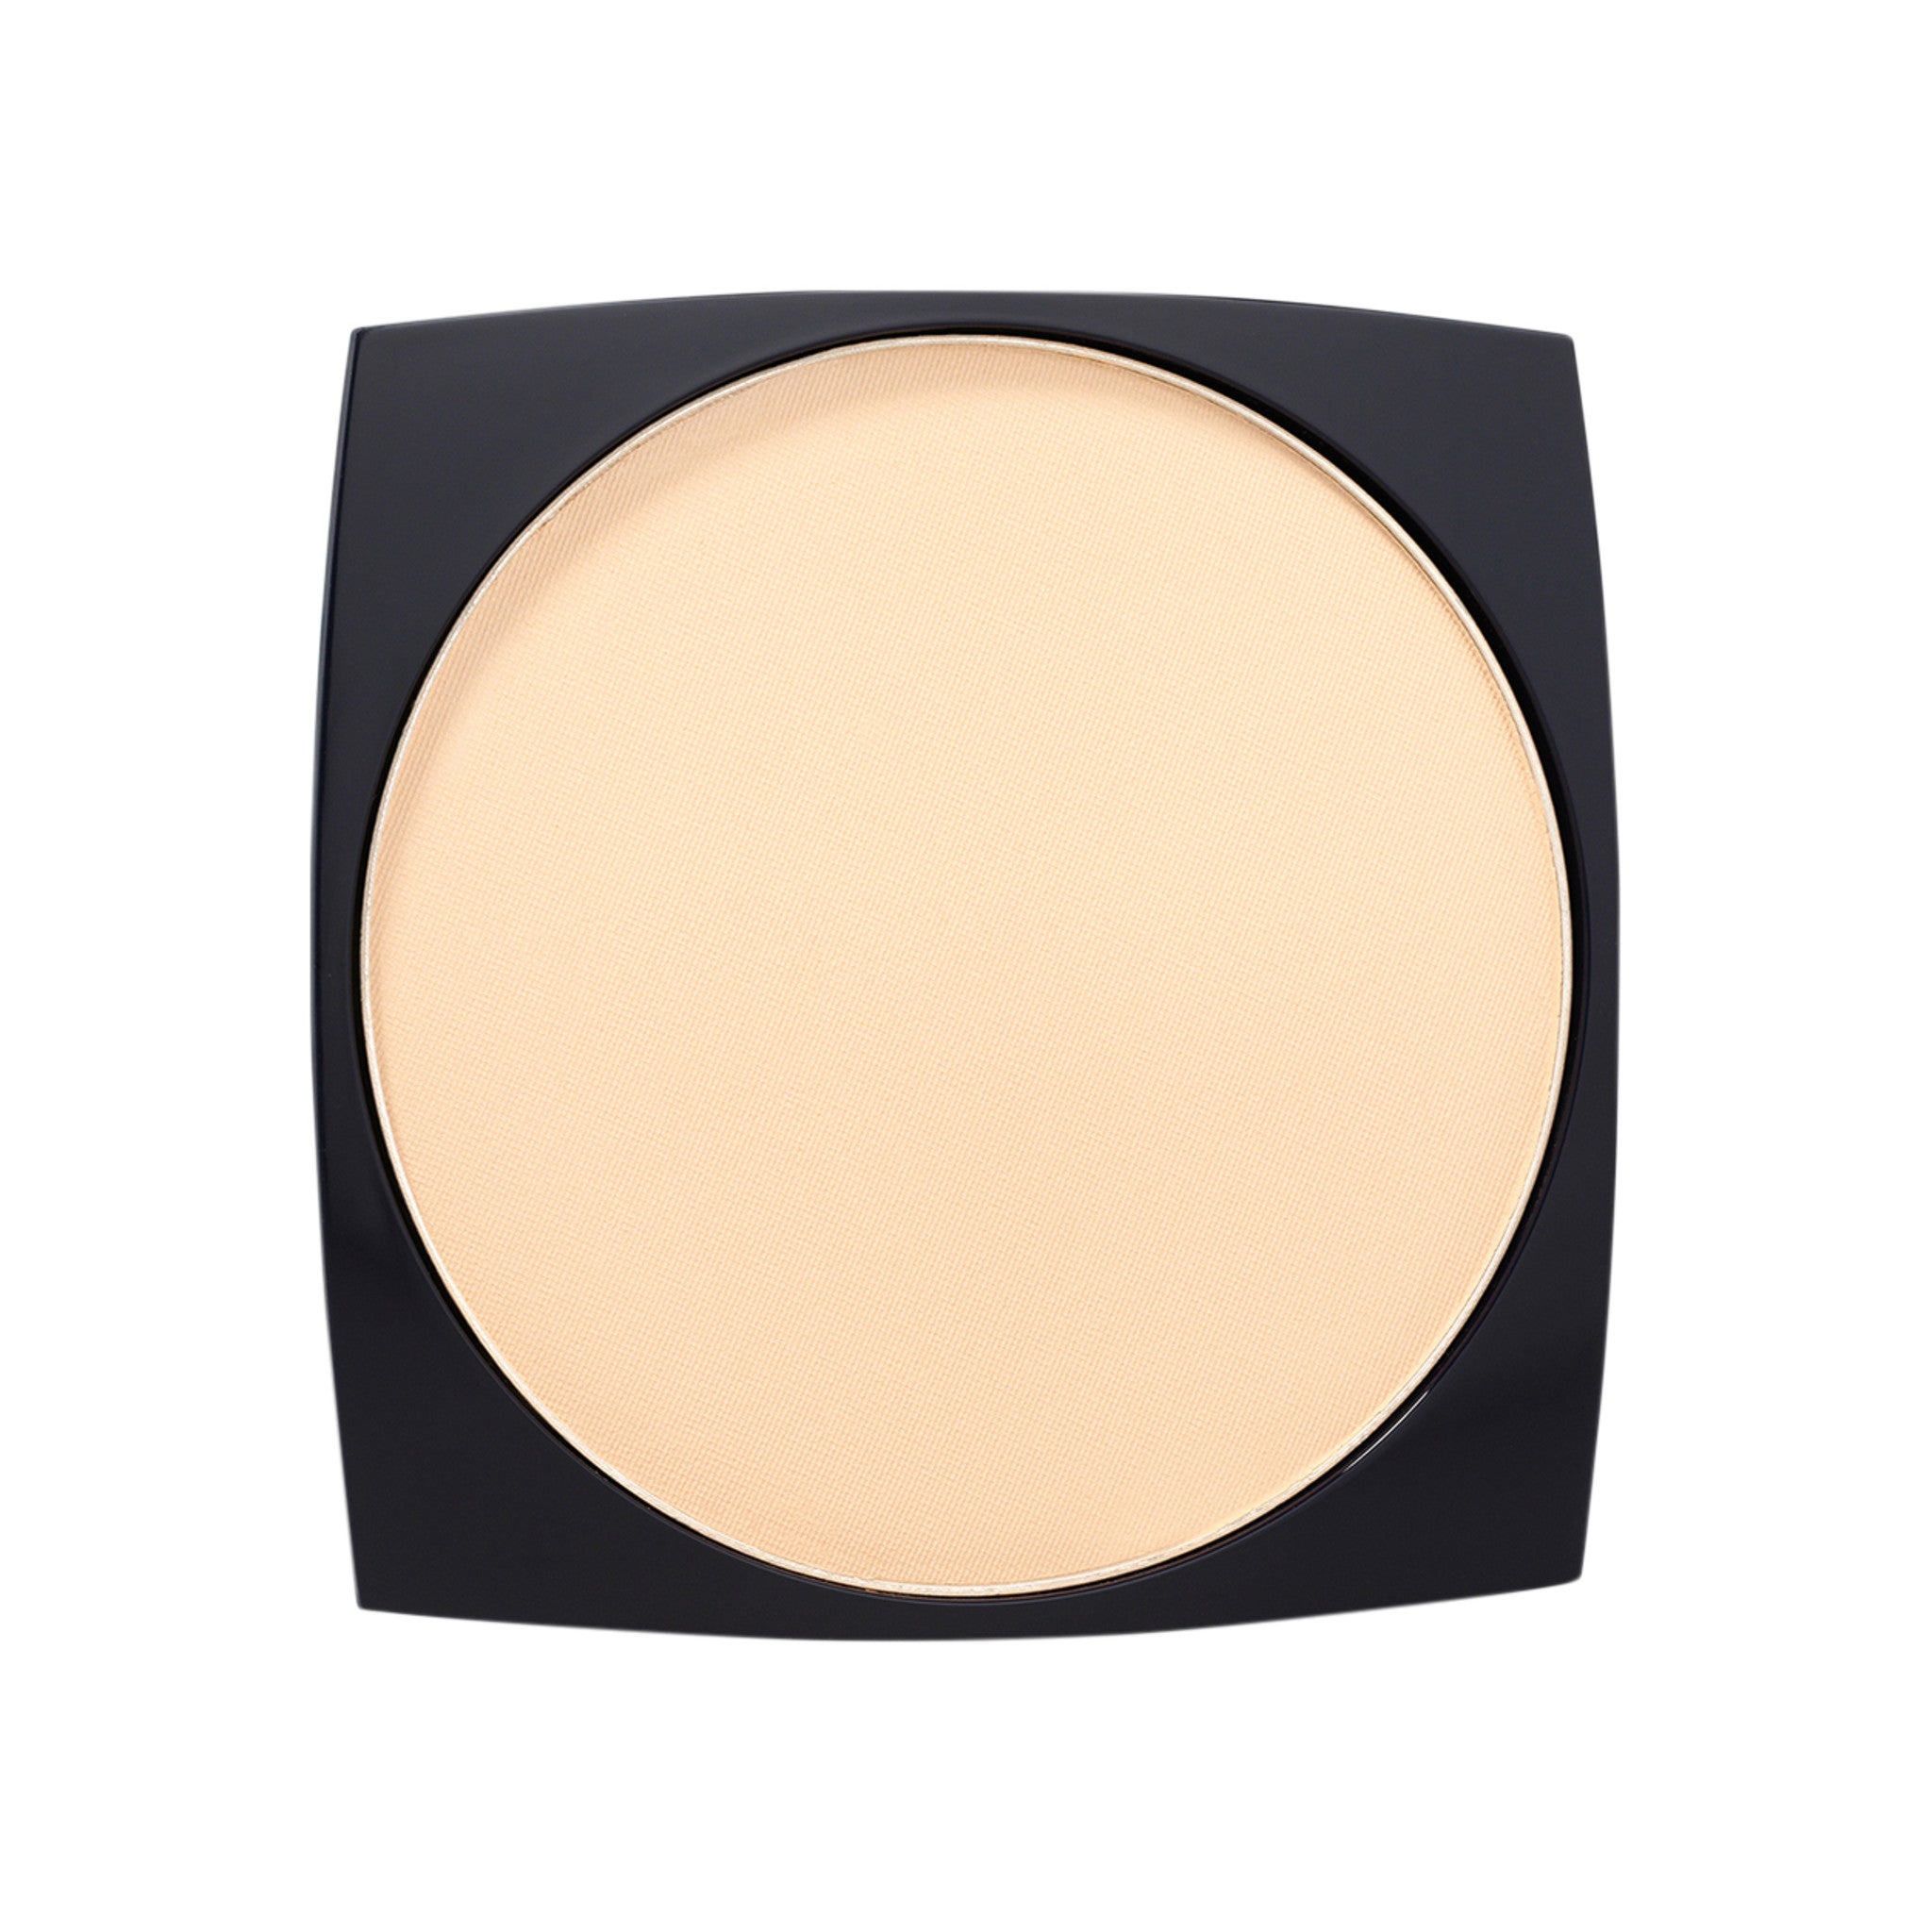 Dropship ESTEE LAUDER - Double Wear Stay In Place Matte Powder Foundation  SPF 10 - # 2N1 Desert Beige P9AT-12 12g/0.42oz to Sell Online at a Lower  Price